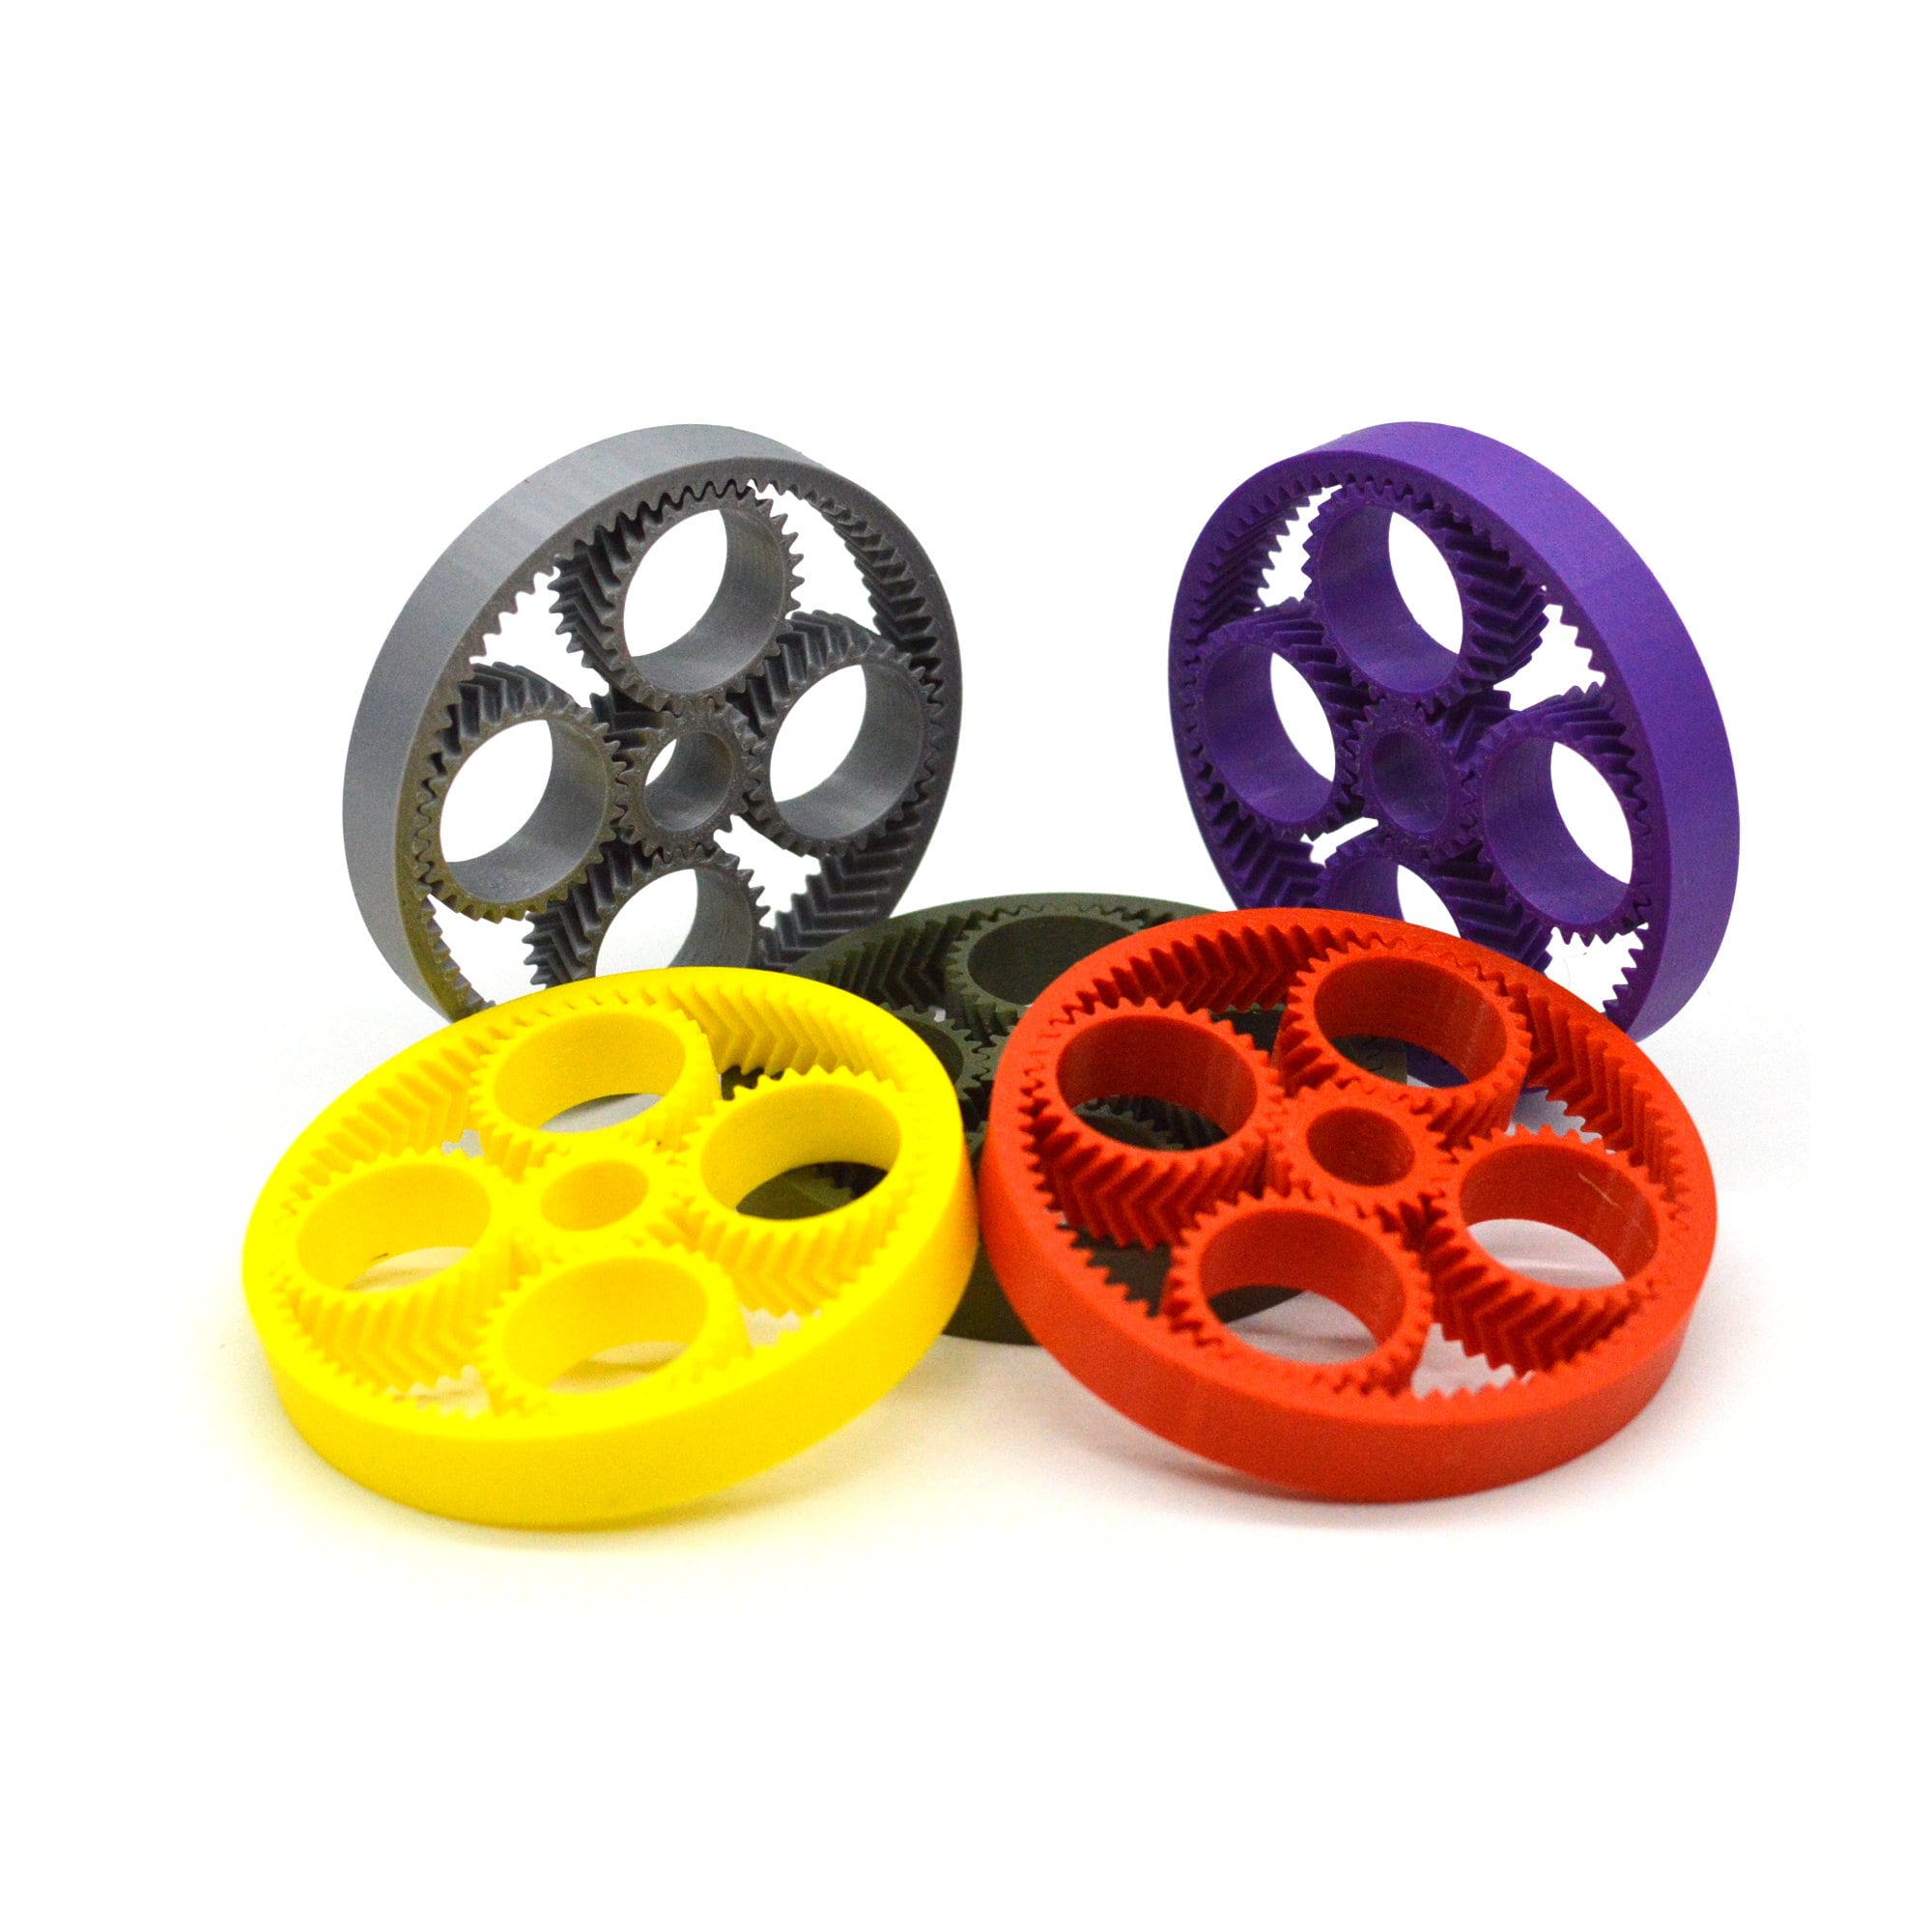 Fidget Spinner Gear Toy - 3D Printed Fun Toy for Kids and Adults